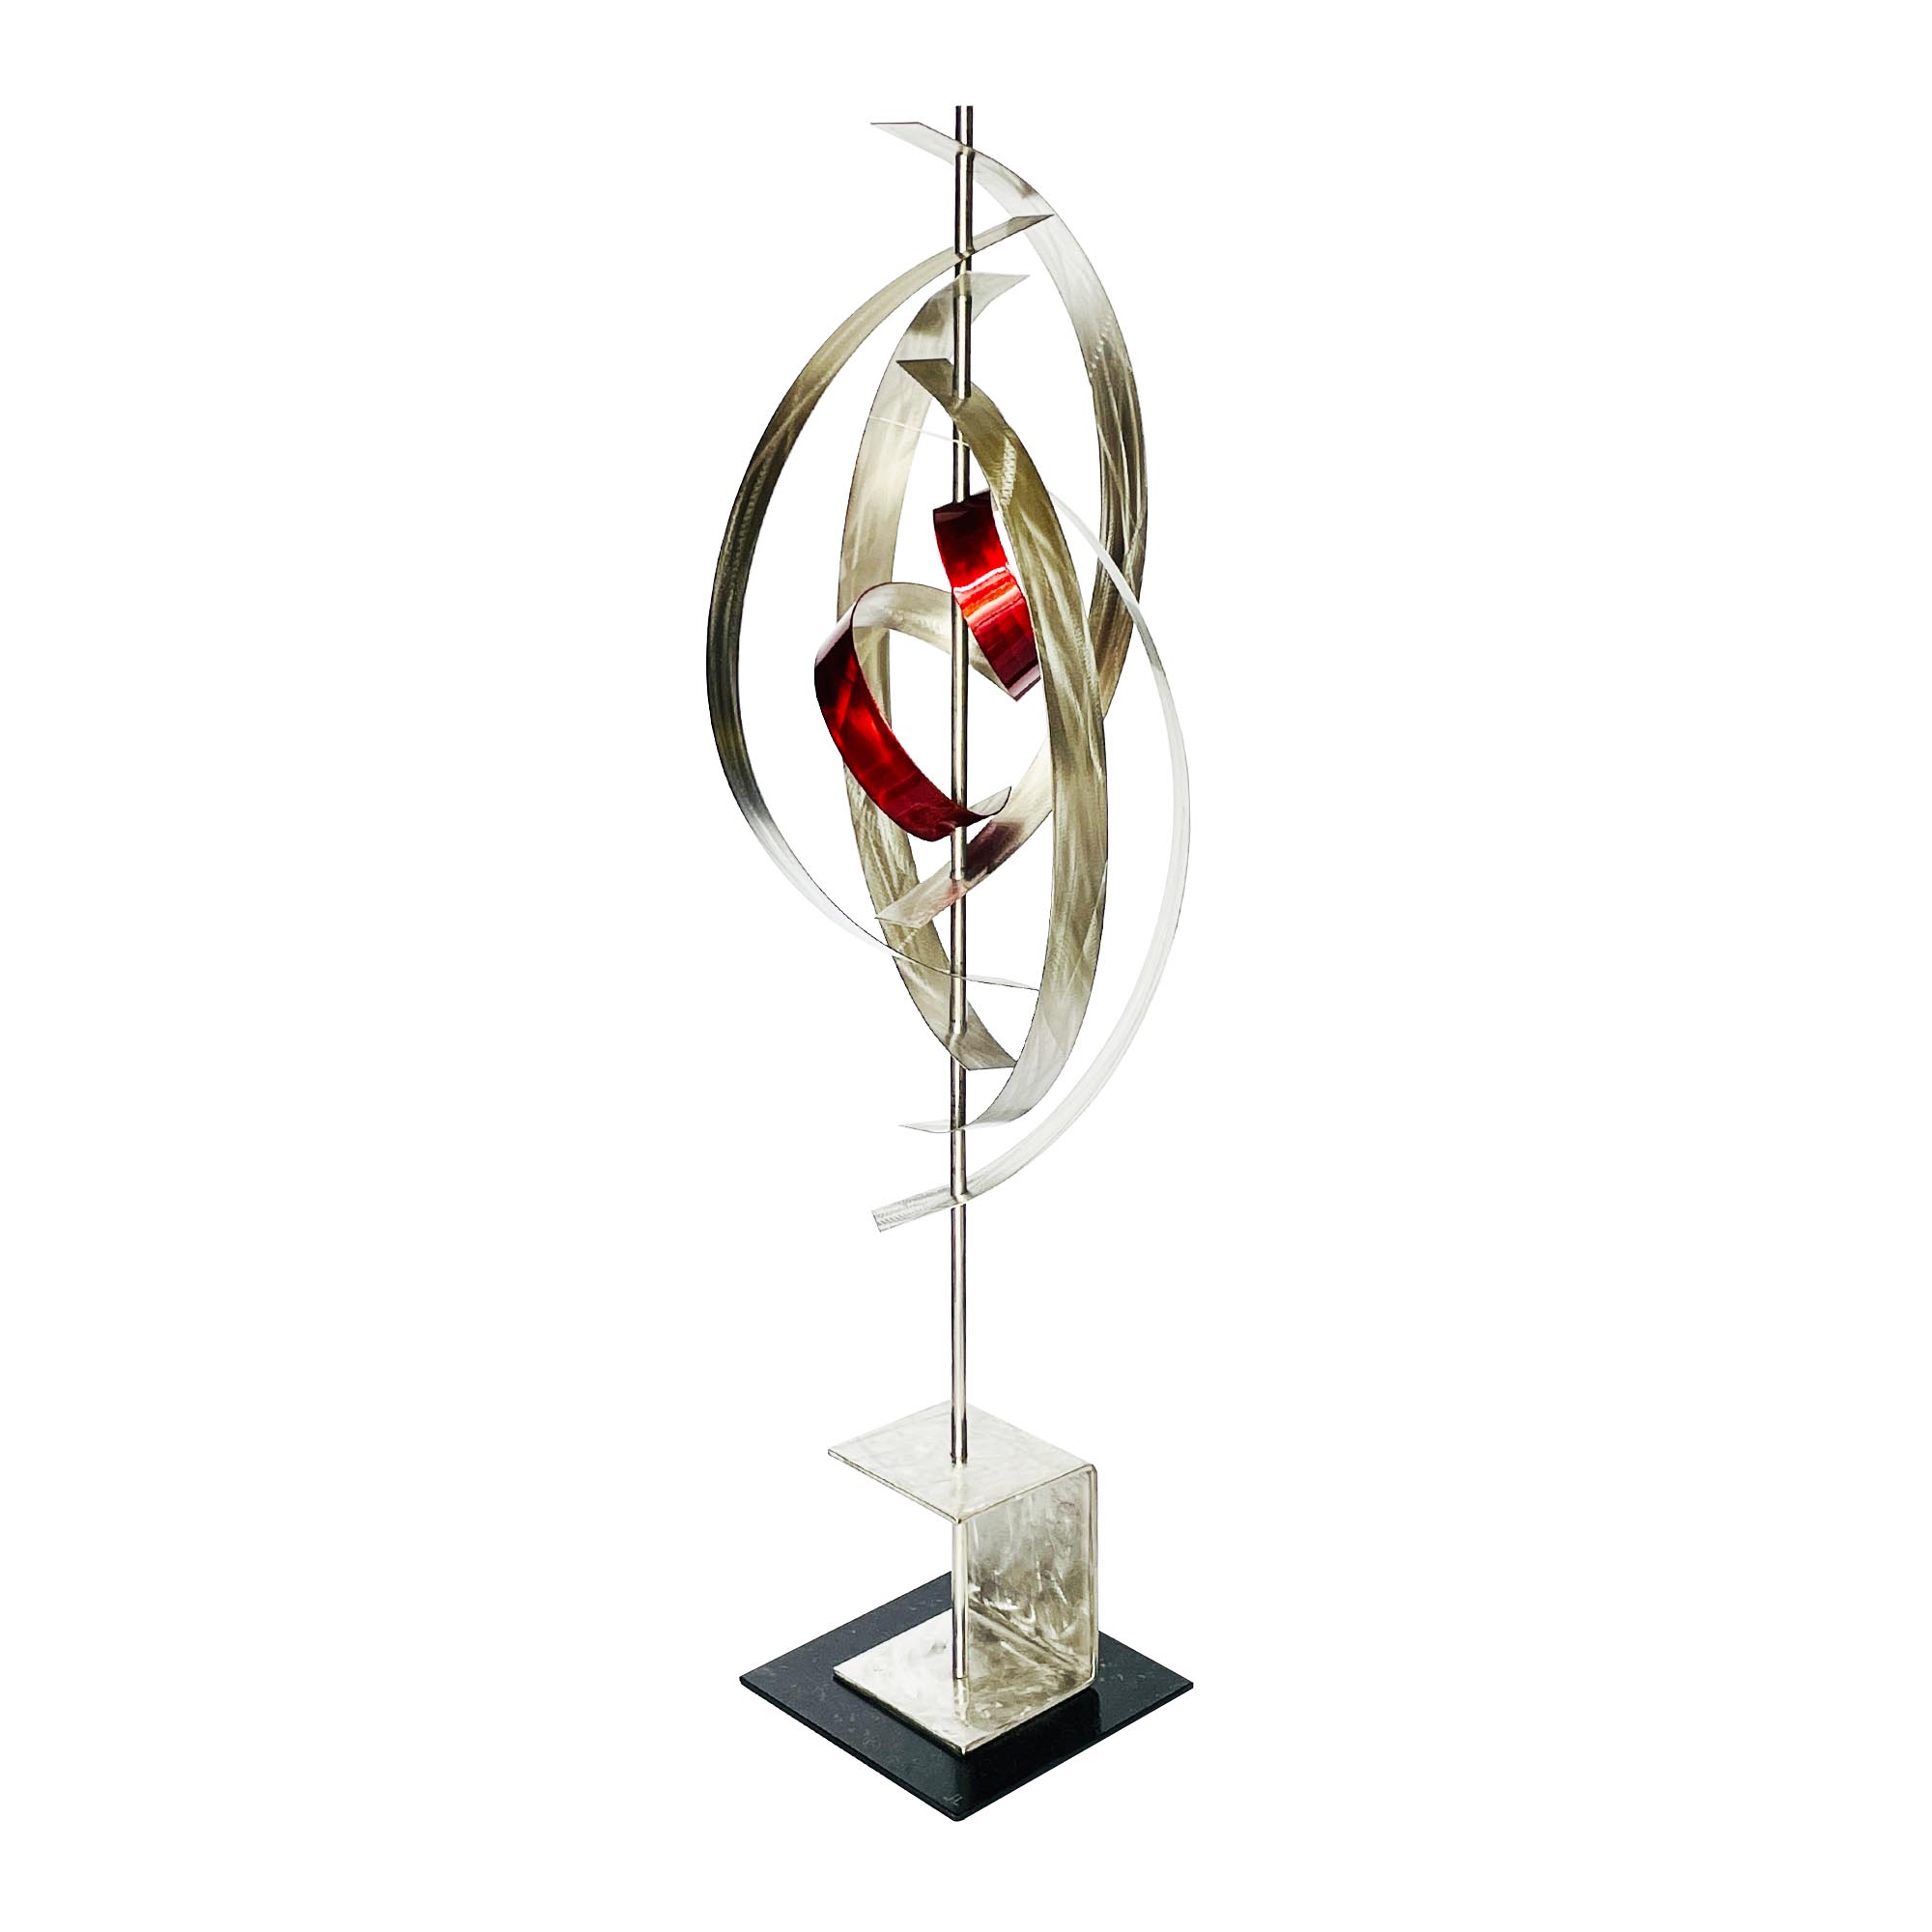 Capture Red by Jackson Wright - Abstract Metal Sculpture, Kinetic Sculpture - Image 3